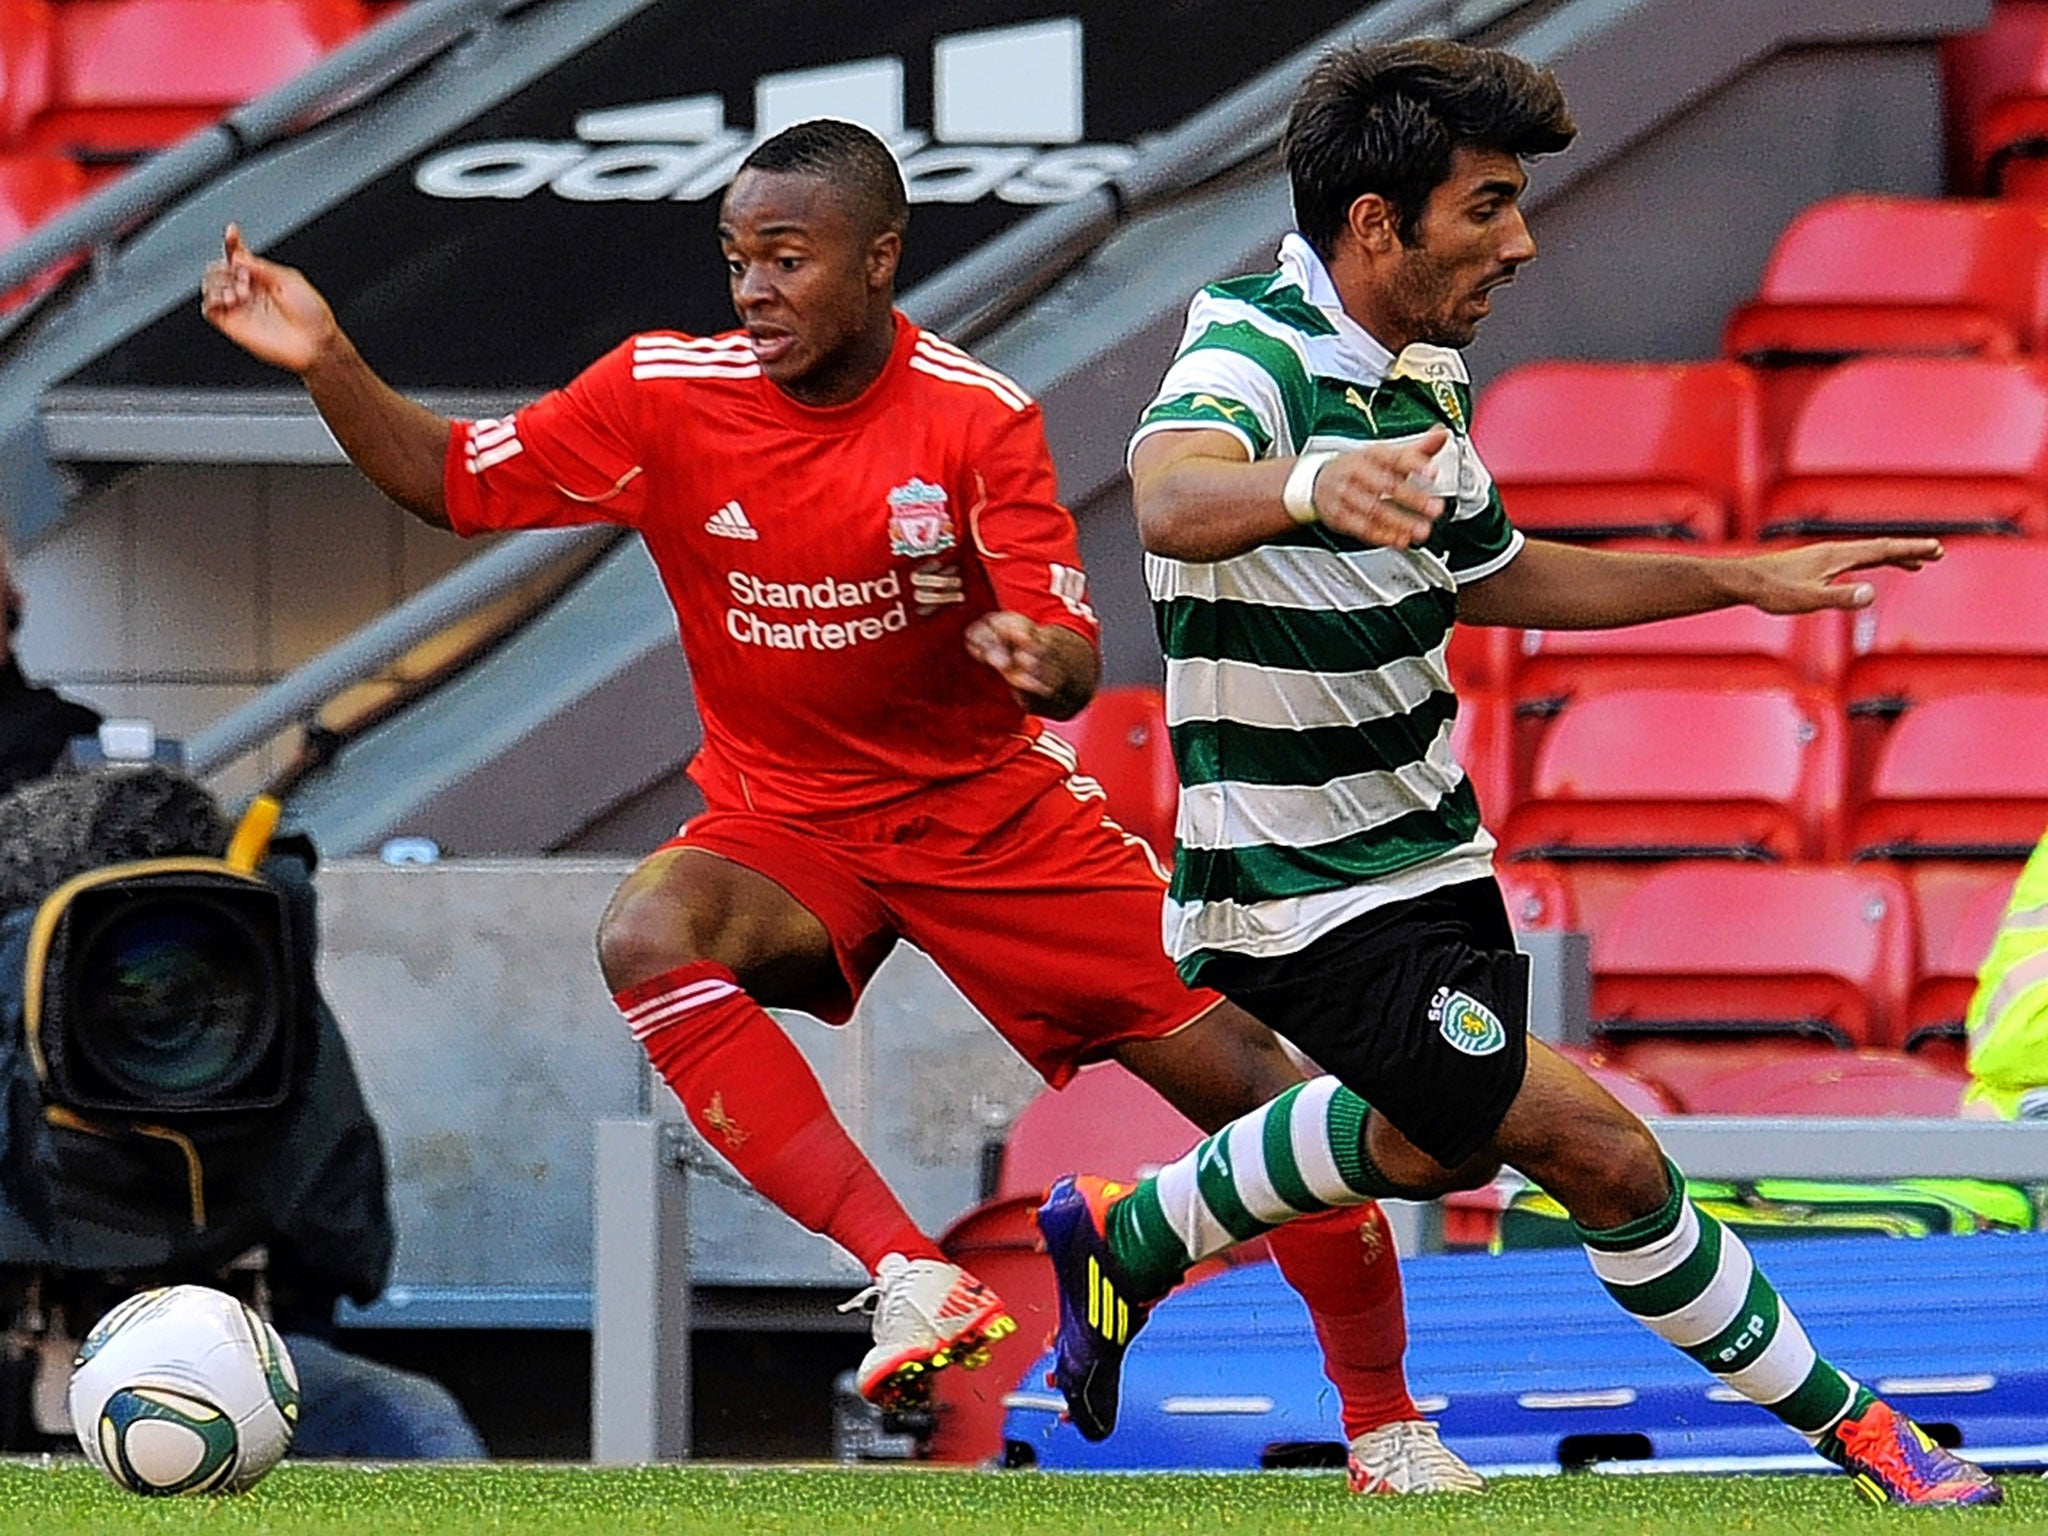 Raheem Sterling playing for Liverpool Under-19s during their 3-0 NextGen Series defeat to Sporting Lisbon at Anfield in 2011